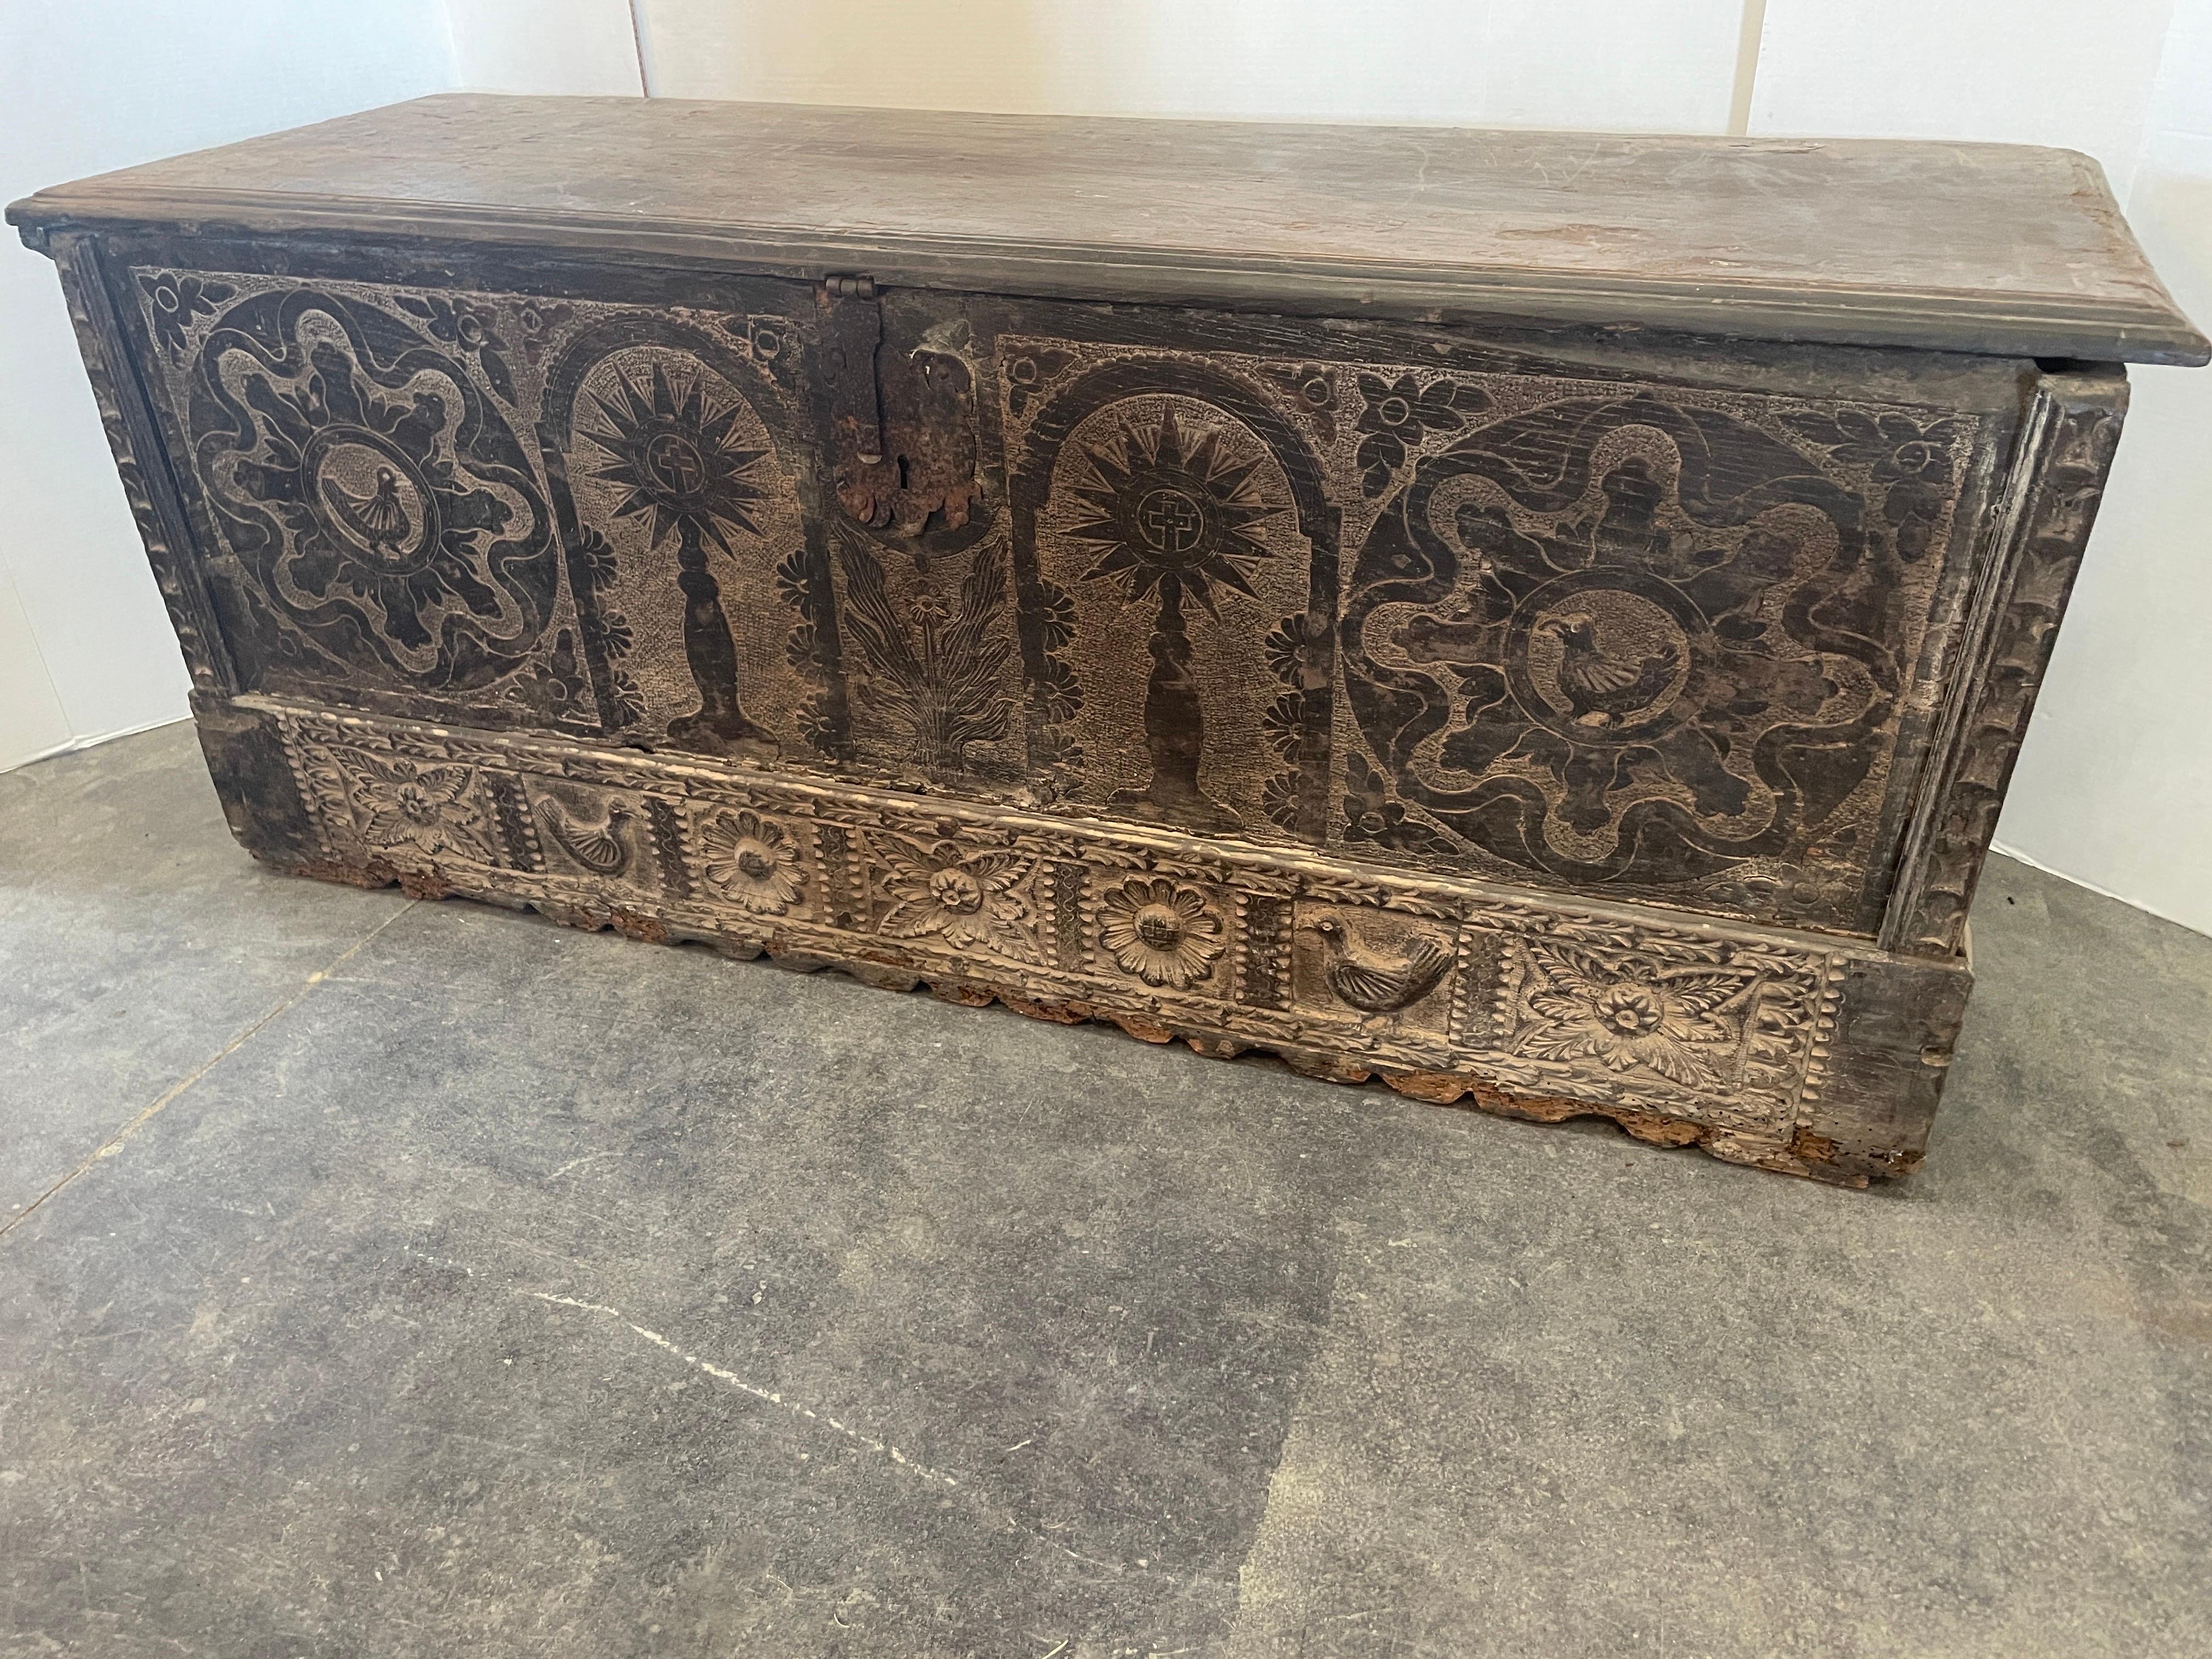 Hand-Carved 17th Century Walnut Carved Trunk From Spain For Sale